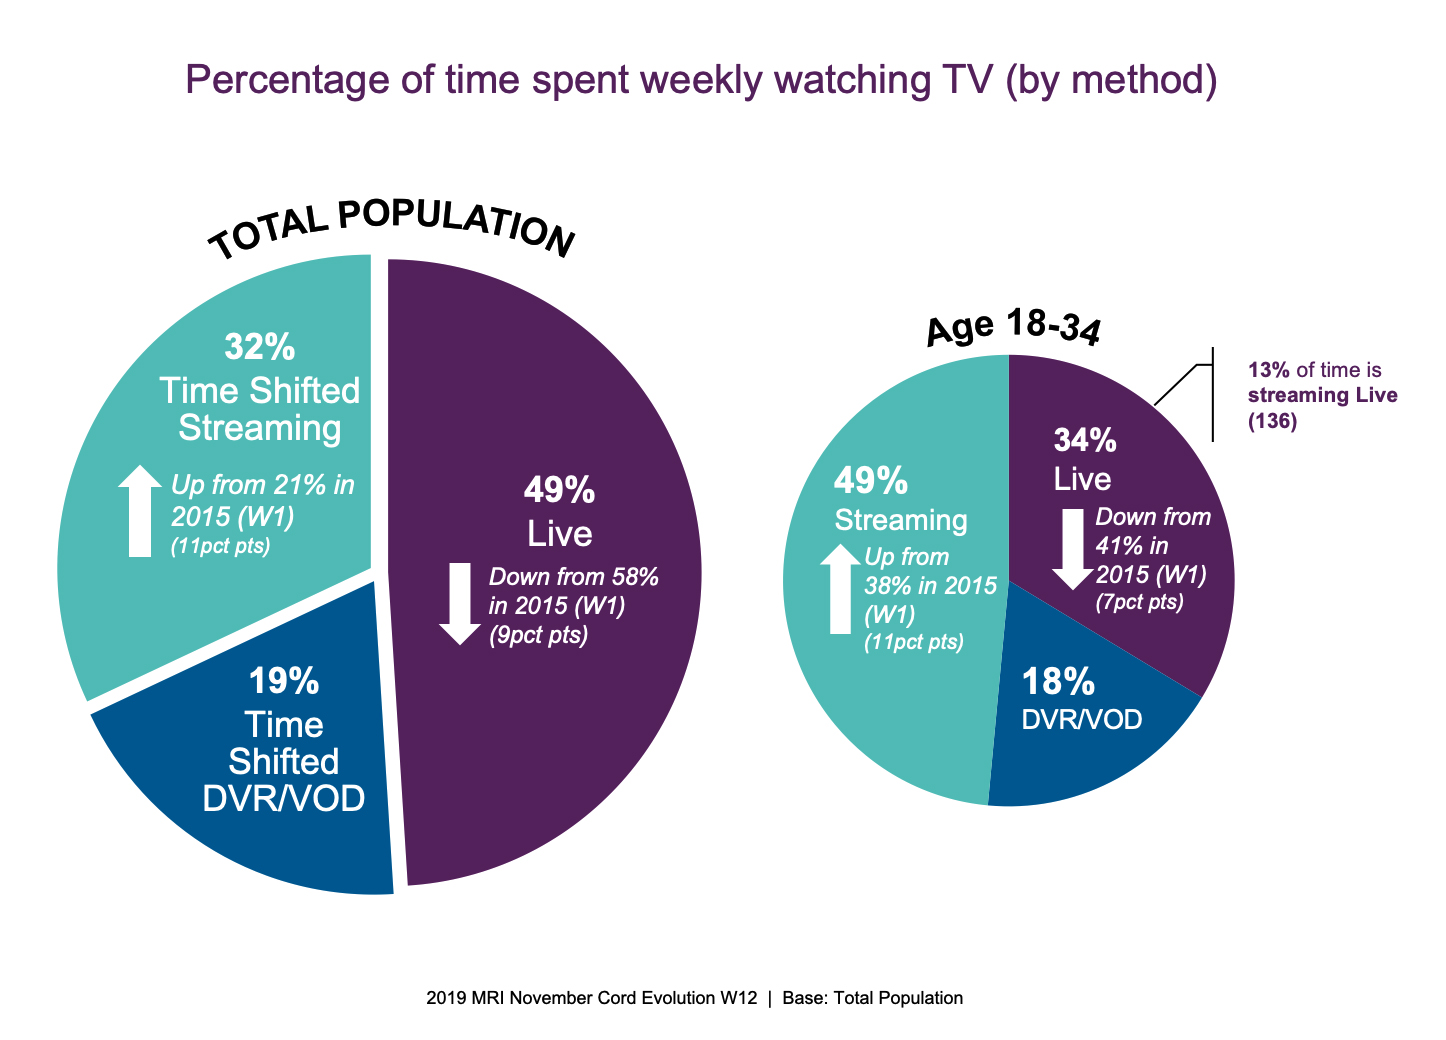 Time spent watching TV weekly by method